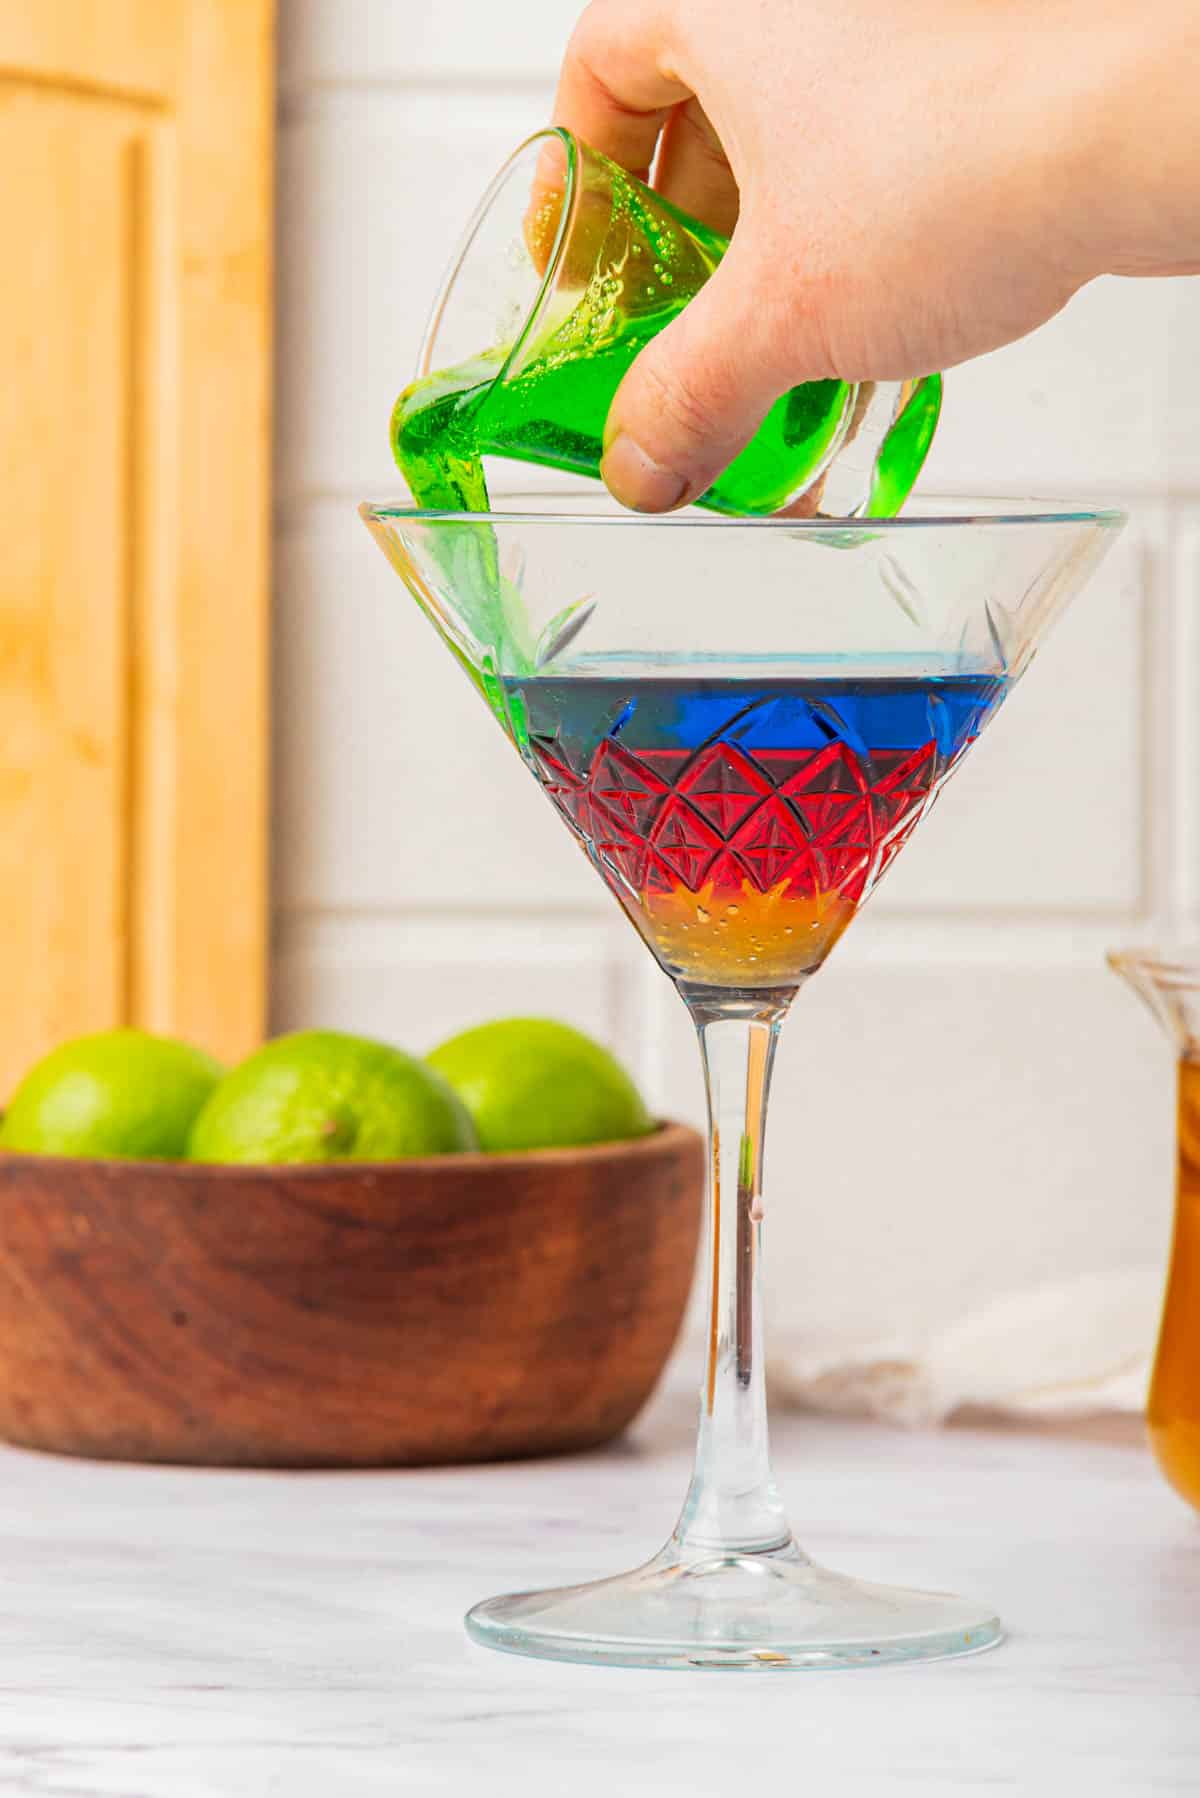 Pouring green liquid into a artini glass with liquid in the colors of the Olympic Rings with limes and a cup of honey in background.